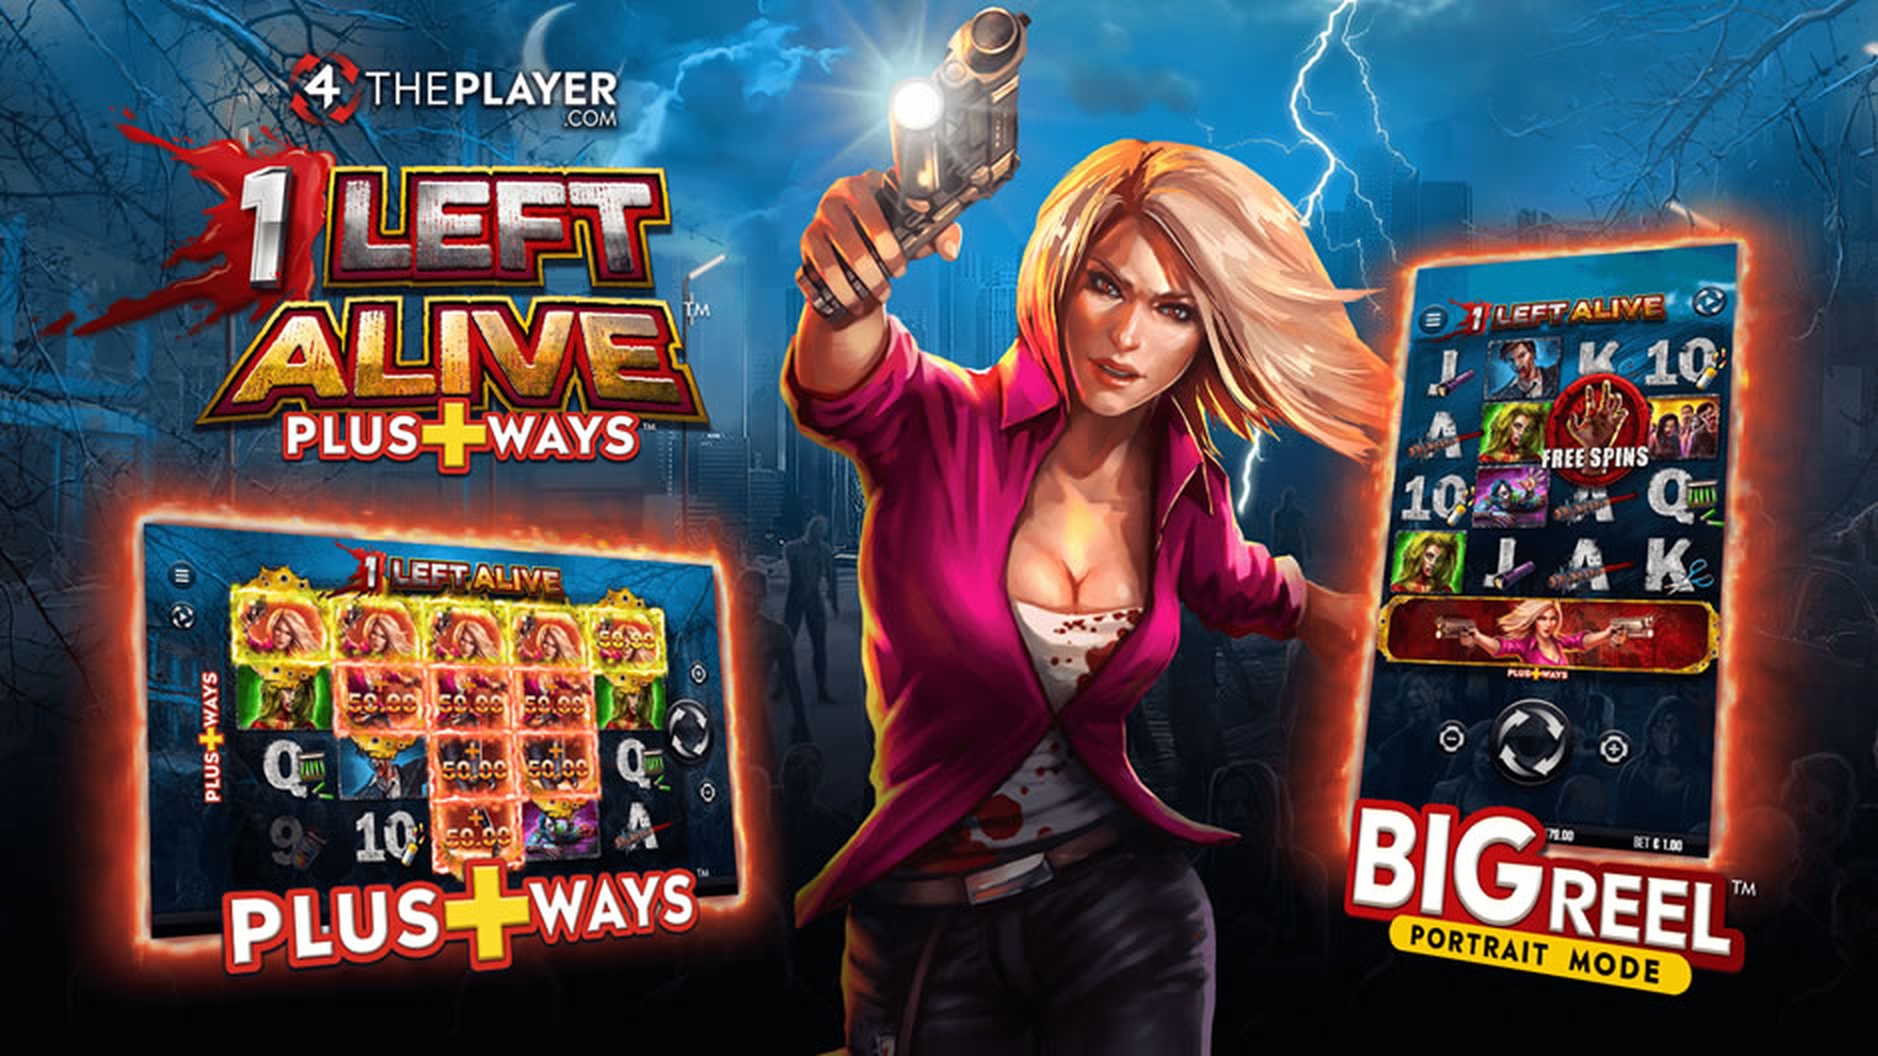 The 1 Left Alive Online Slot Demo Game by 4ThePlayer